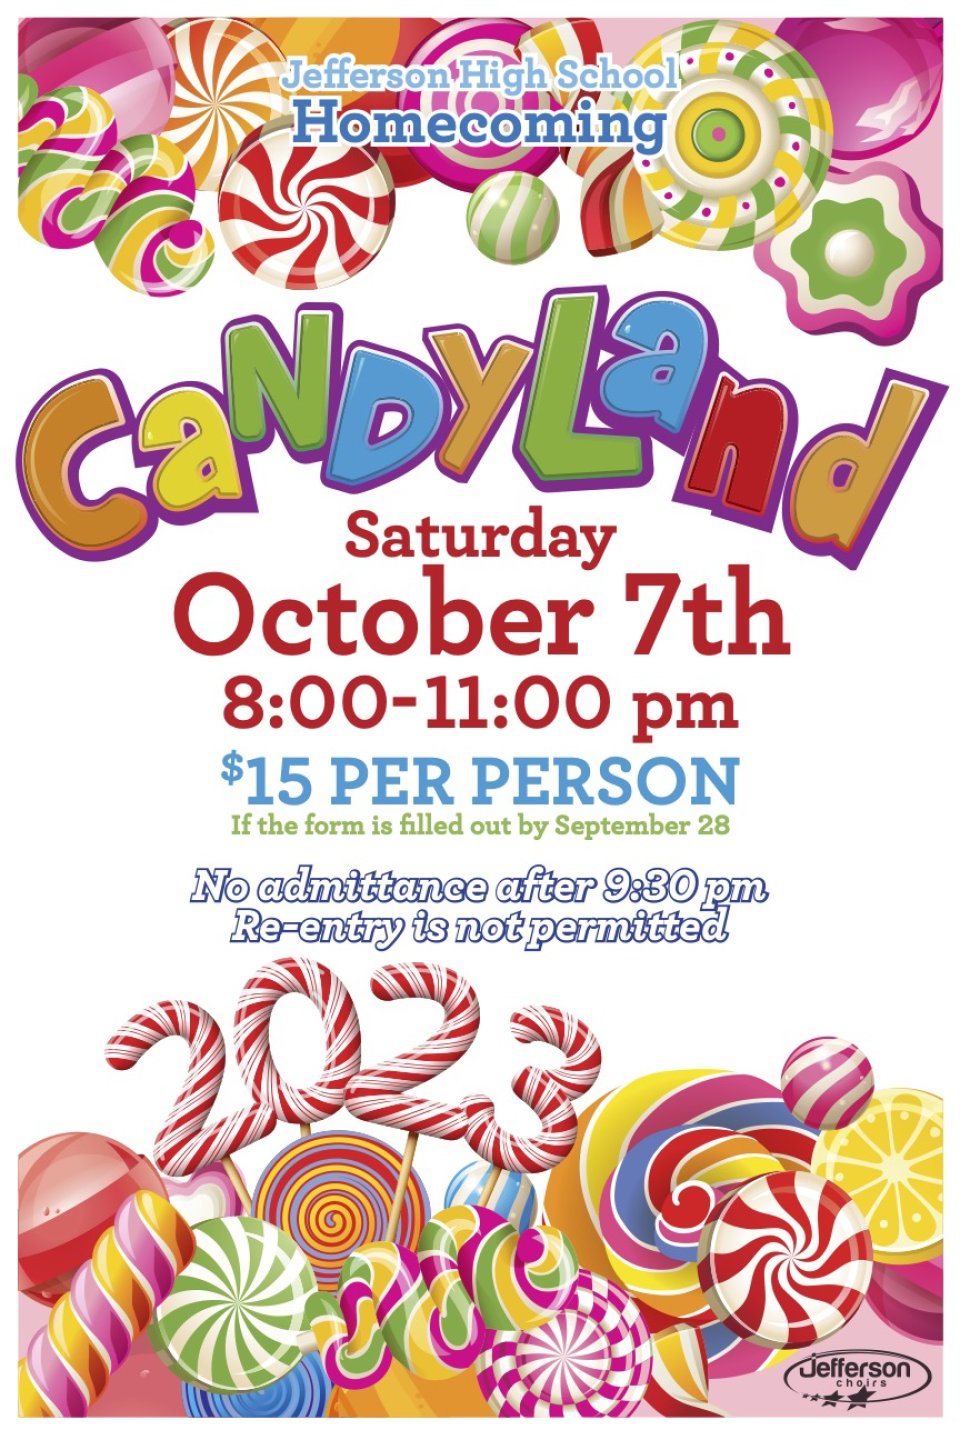 candyland dance saturday october 7 from 8 pm to 11 pm; $15 tickets